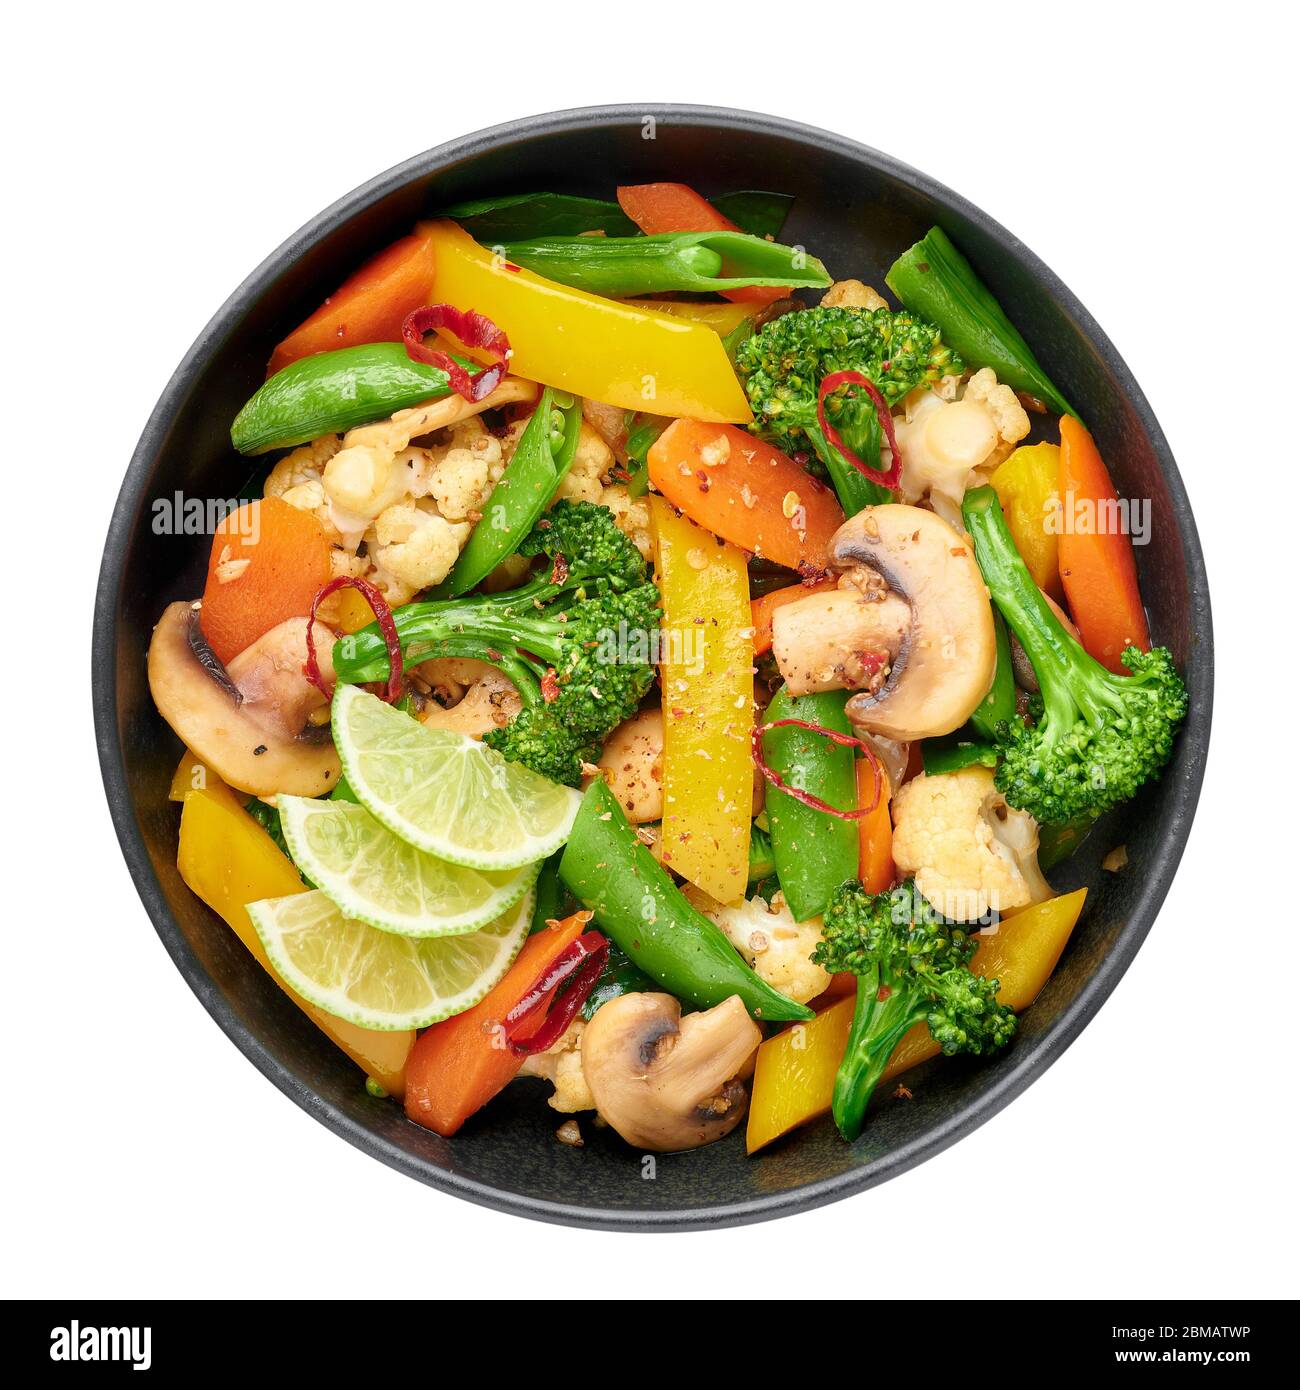 Pad Pak Ruam or Veg Thai Stir-Fried Vegetables in black bowl isolated on  backdrop. Pad Pak is thailand cuisine vegetarian dish with mix of  vegetables Stock Photo - Alamy